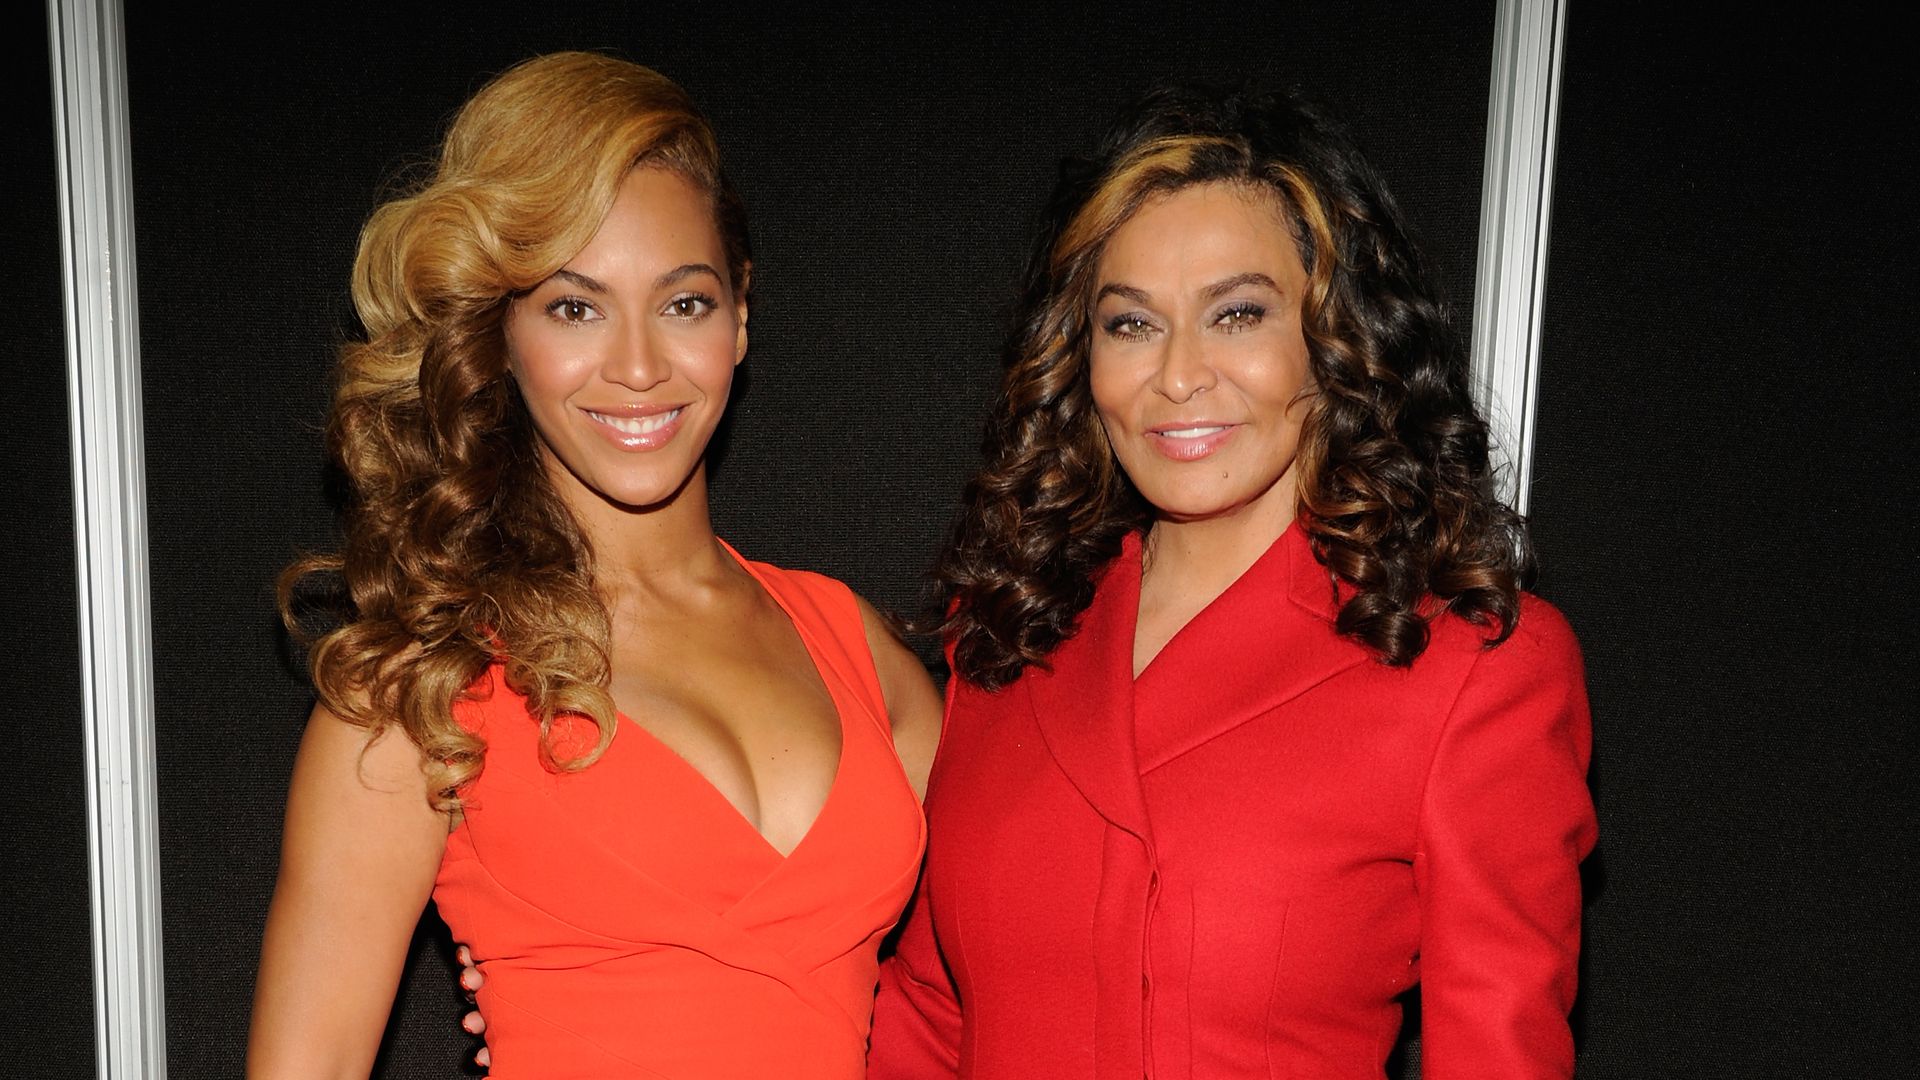  Beyonce and Tina Knowles pose backstage at the Pepsi Super Bowl 